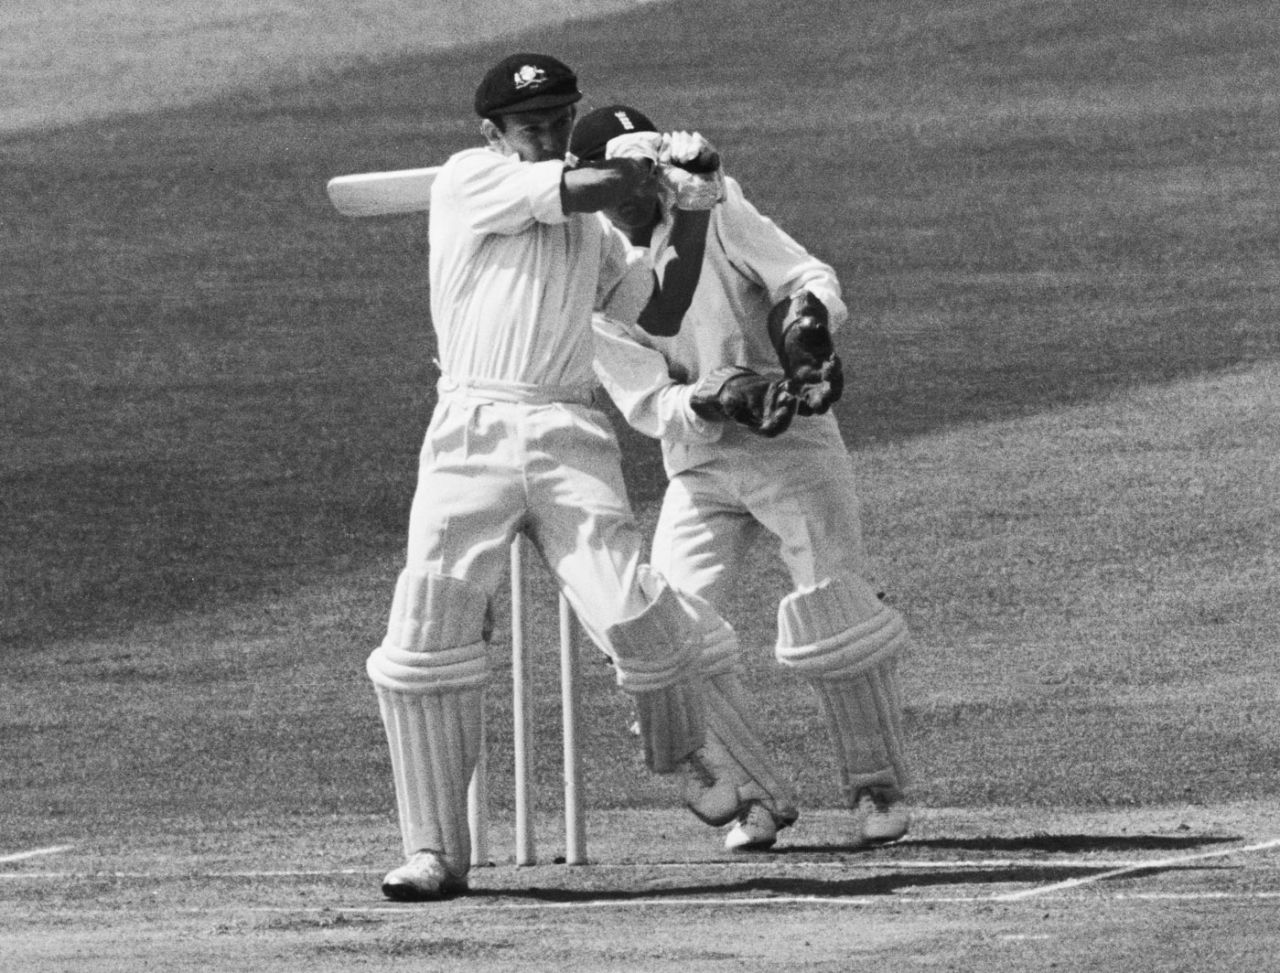 Doug Walters pulls during his innings of 86, England v Australia, 1st Test, Manchester, 4th day, June 10, 1968